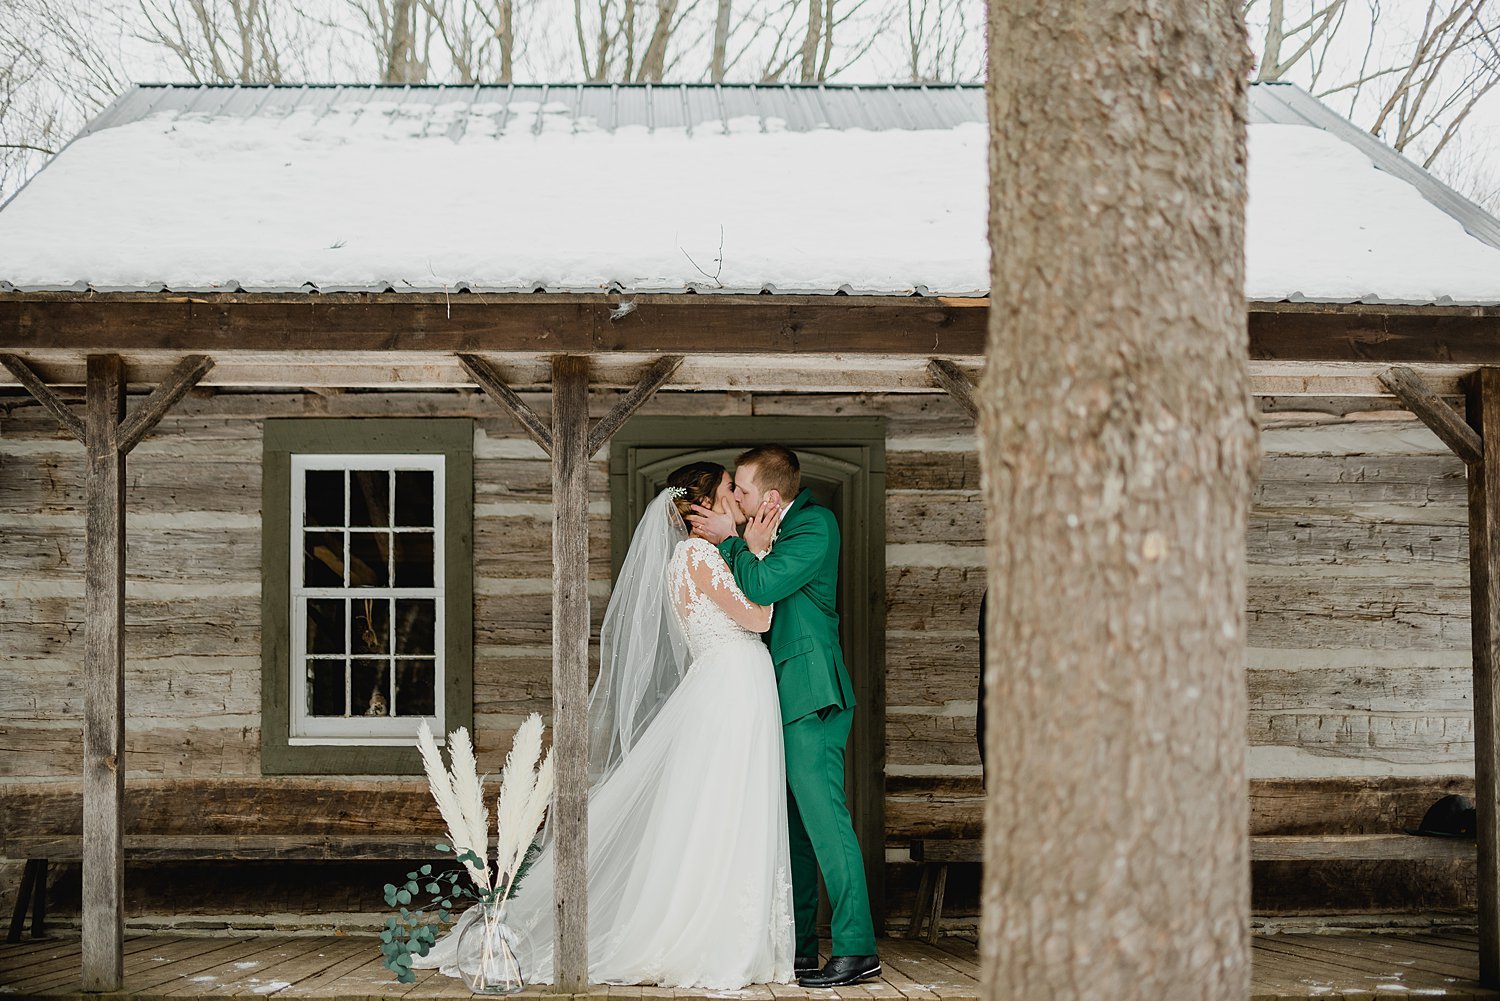 Intimate Winter Elopement at O'Hara Mill Homestead in Madoc, Ontario | Prince Edward County Wedding Photographer | Holly McMurter Photographs_0021.jpg